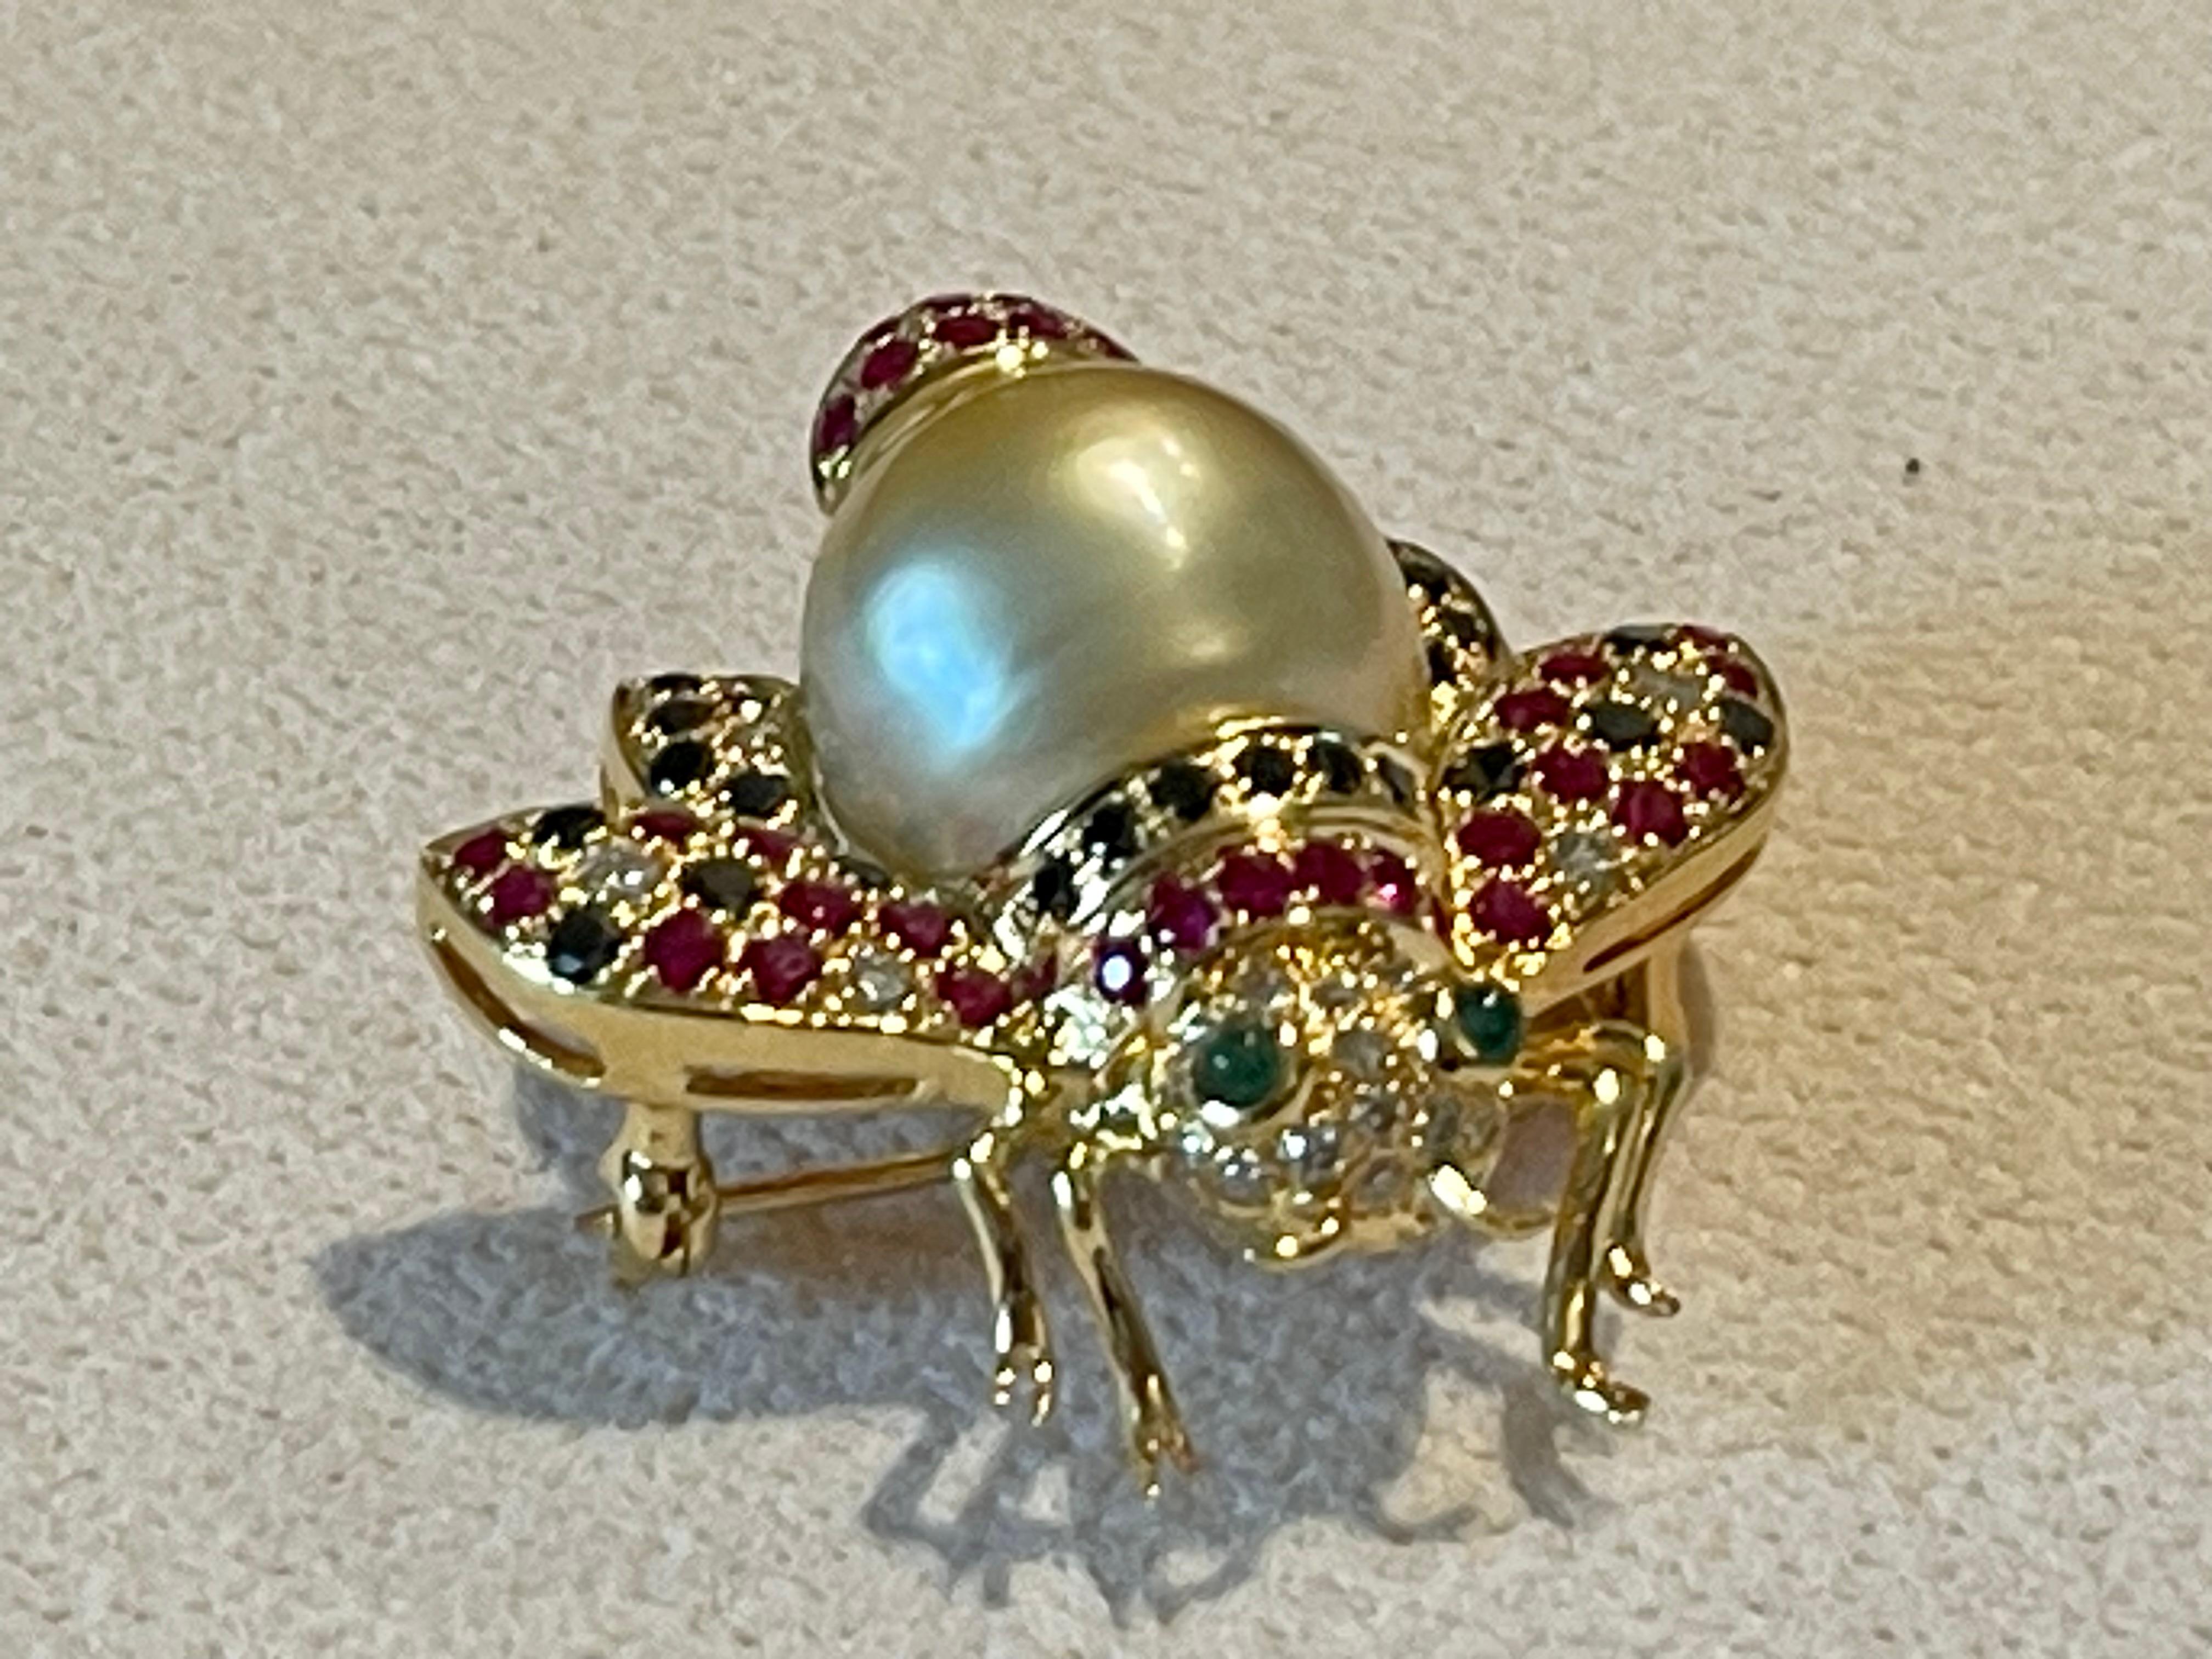 For all bee lovers- you are staring at a exquisite pin brooch!
Beautiful Bumble Bee brooch, set with 22 white brilliant cut Diamonds weighing 0.30 ct , G color, vs clarity, 25 black  Diamonds weighing 0.53 ct,  31 Rubies weighing 0.92 ct and 2